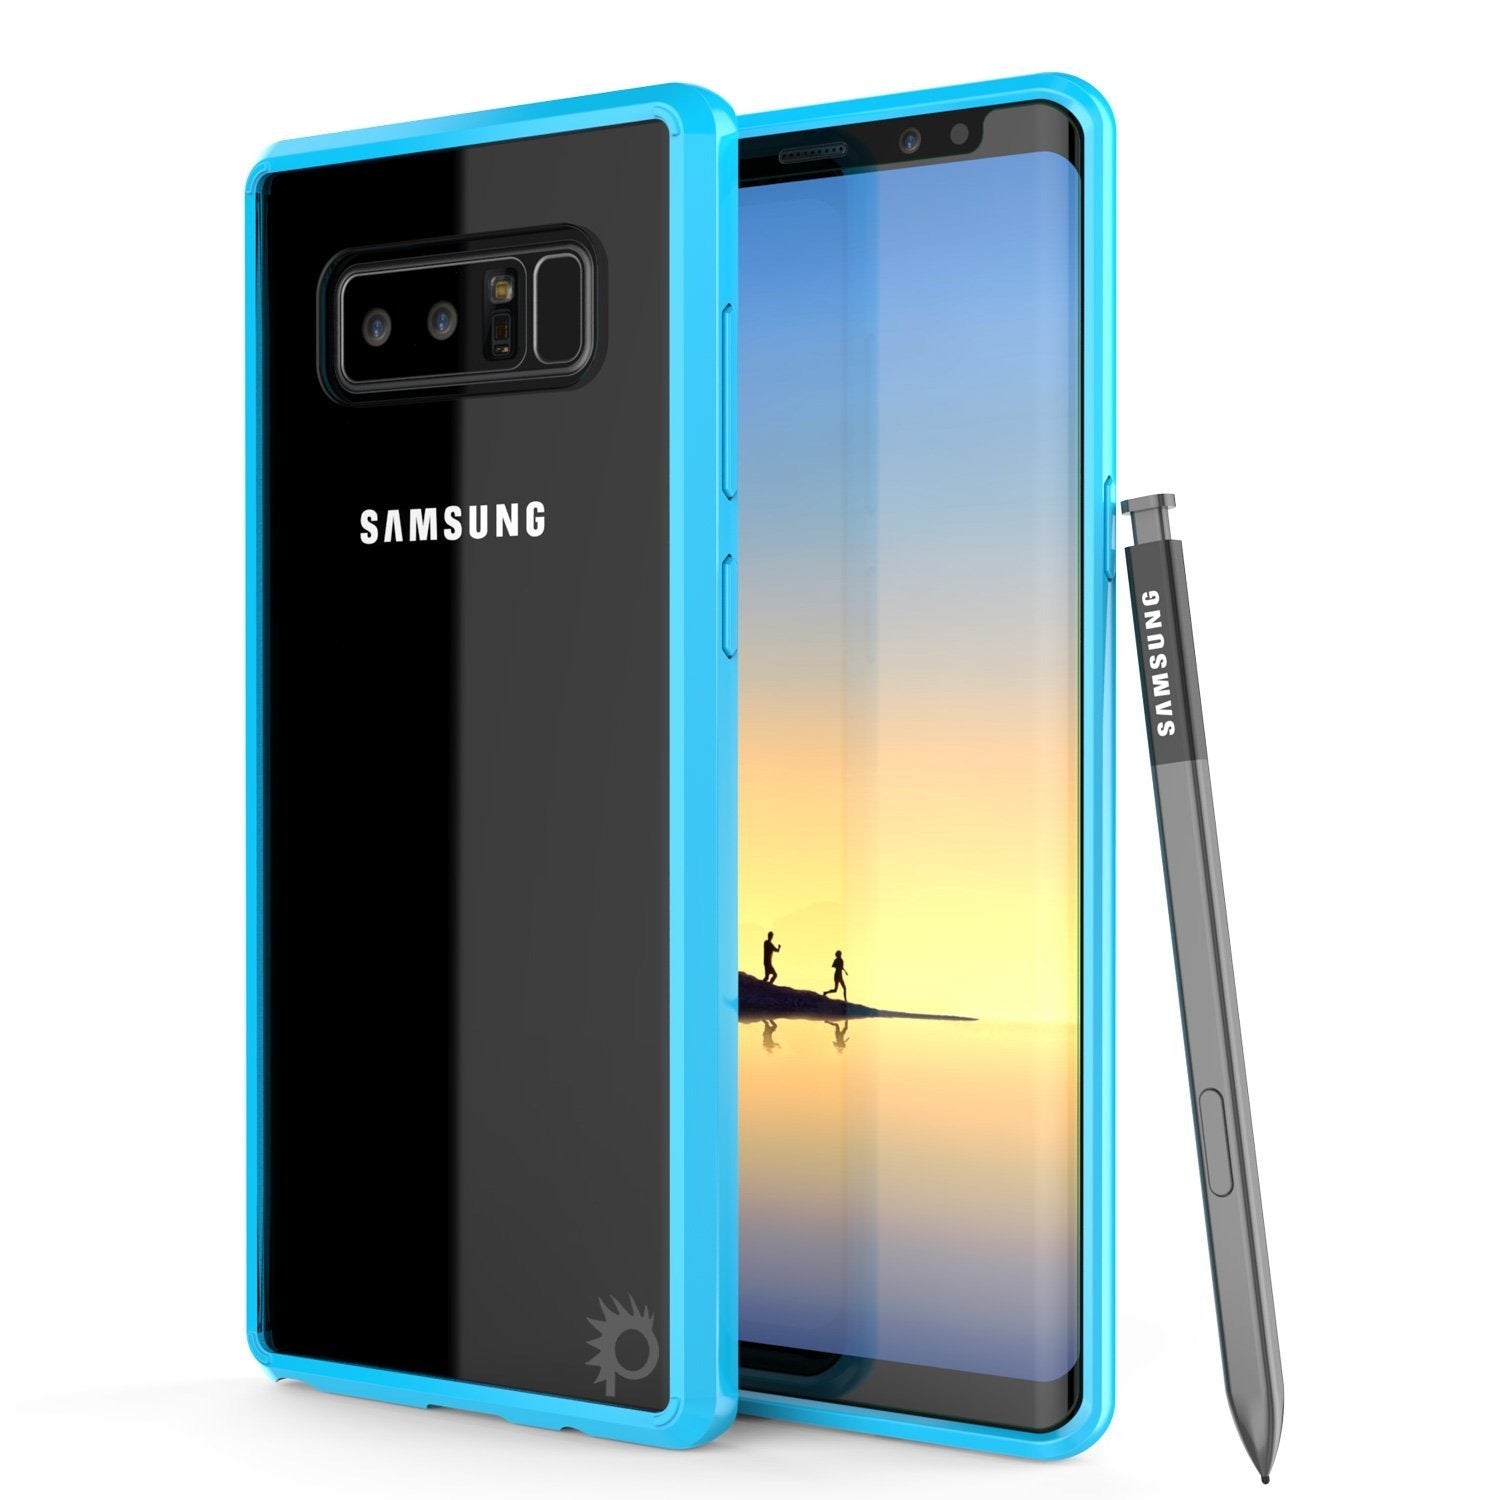 Galaxy Note 8 Case, PUNKcase [LUCID 2.0 Series] [Slim Fit] Armor Cover w/Integrated Anti-Shock System & PUNKSHIELD Screen Protector [Light Blue]